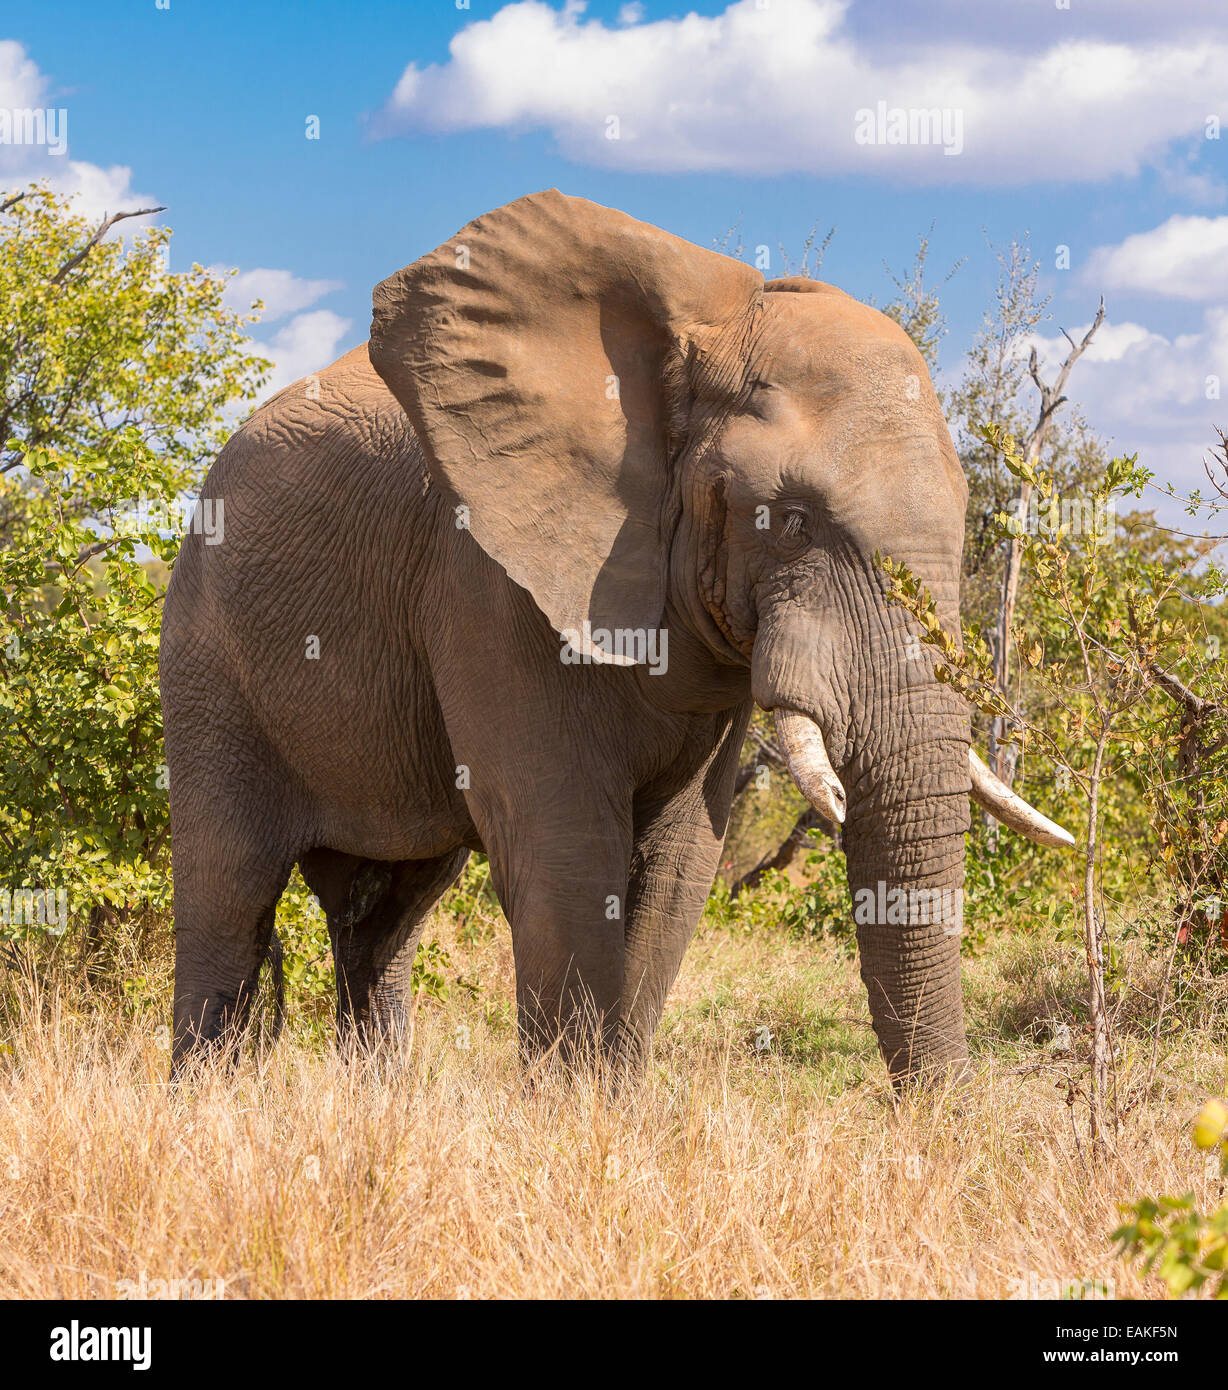 Parco Nazionale di Kruger, SUD AFRICA - Elephant Foto Stock